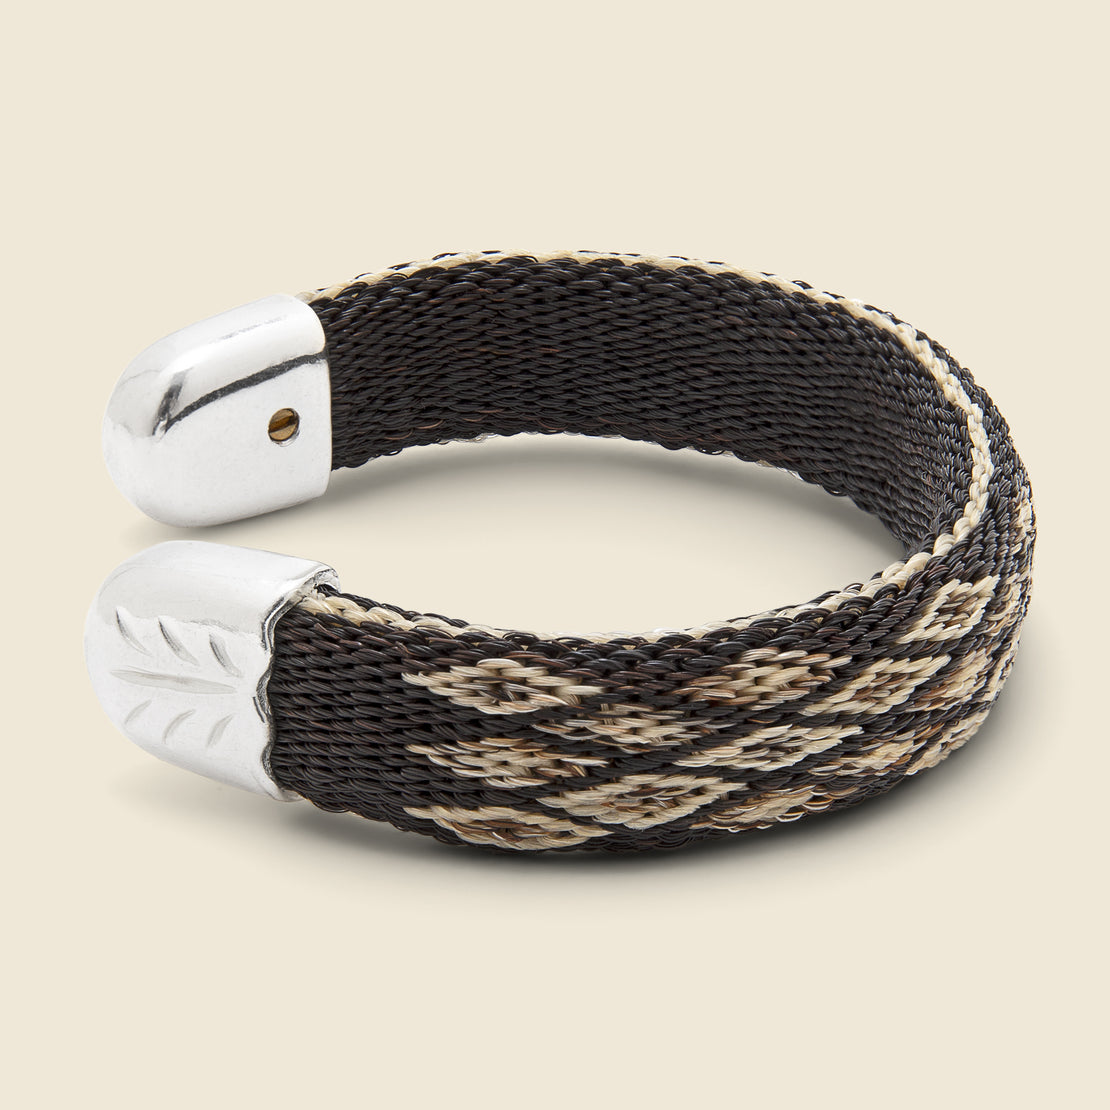 Bendable Horsehair Bracelet - Black/Brown - Chamula - STAG Provisions - Accessories - Cuffs